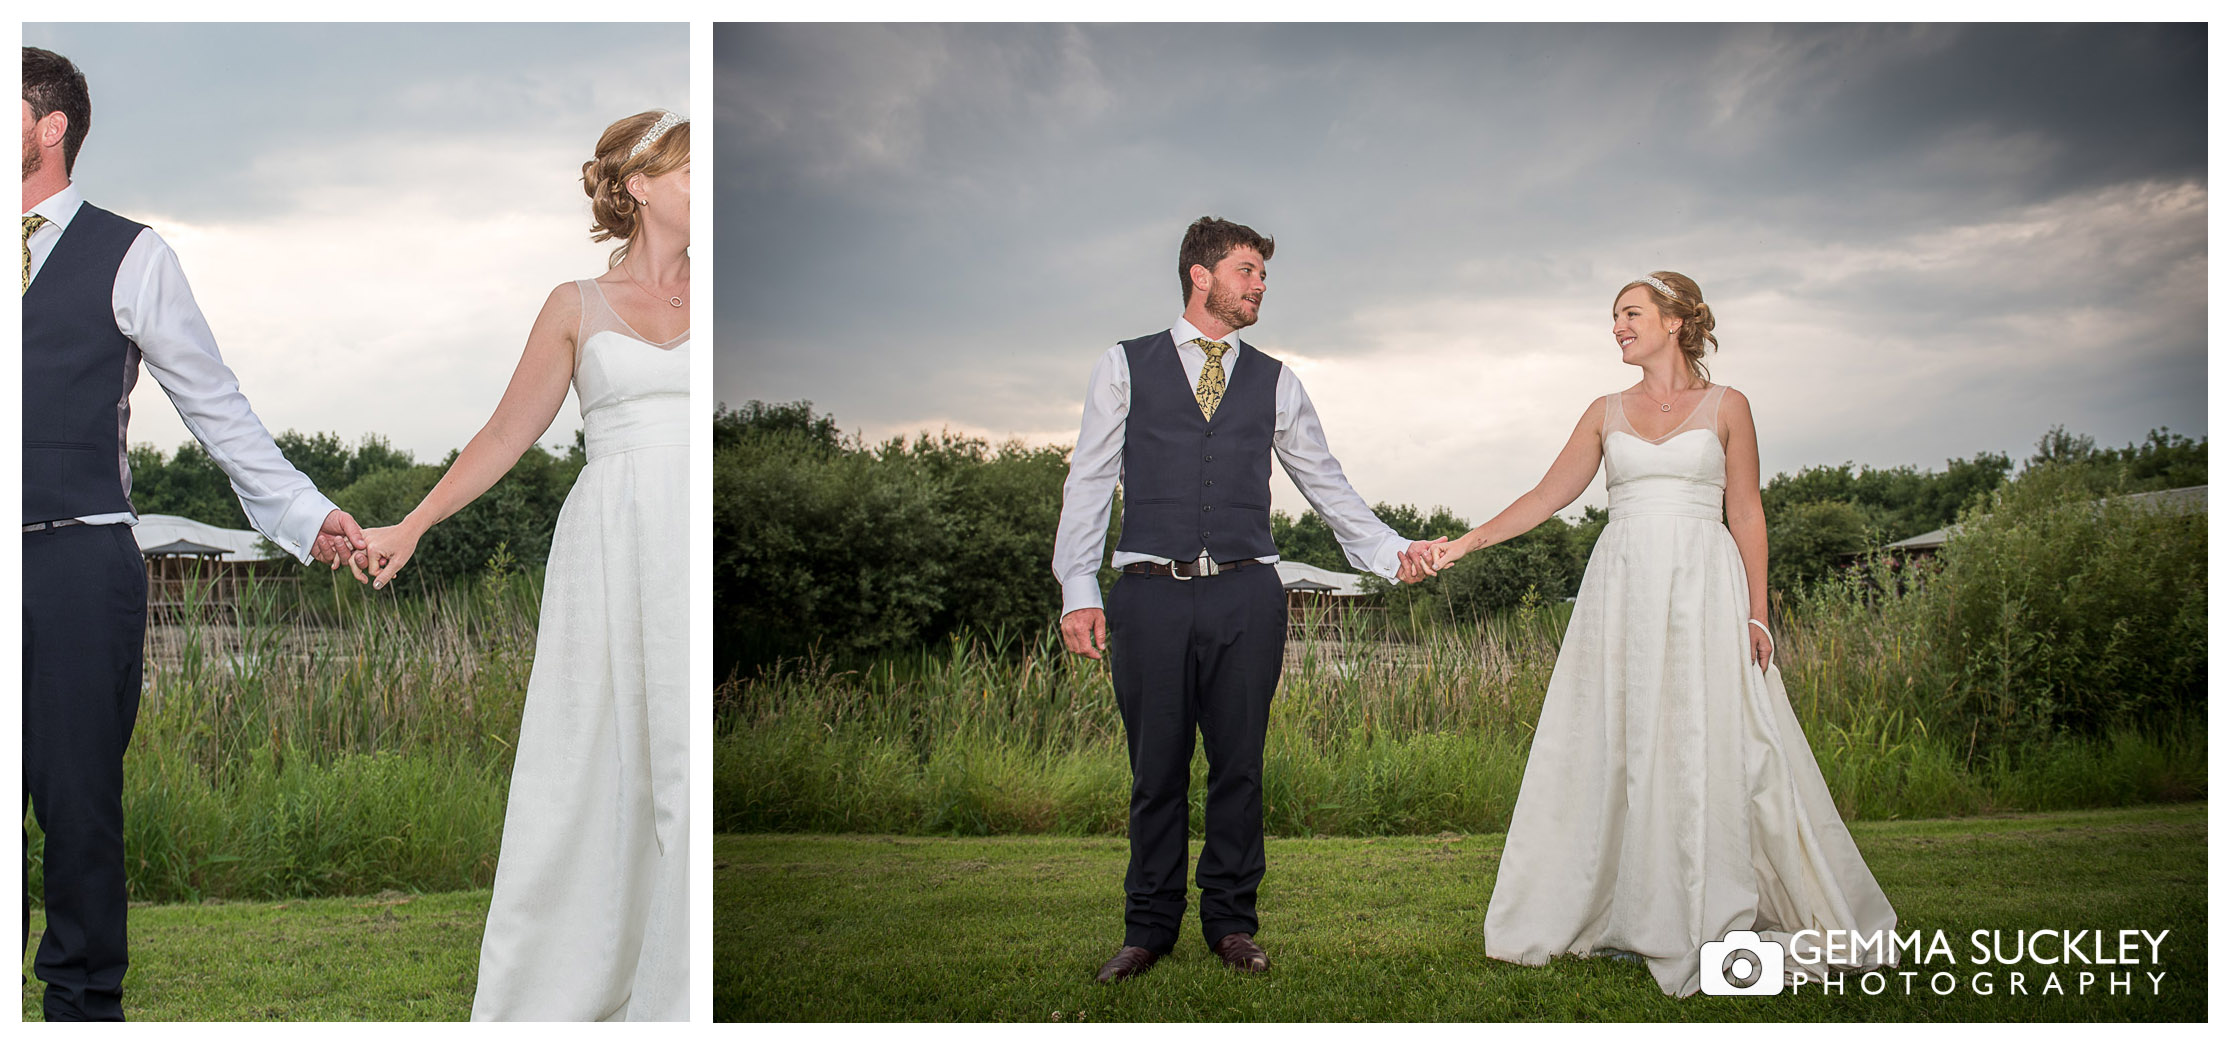 wedding photo of the bride and groom at Oaklands in East Yorkshire